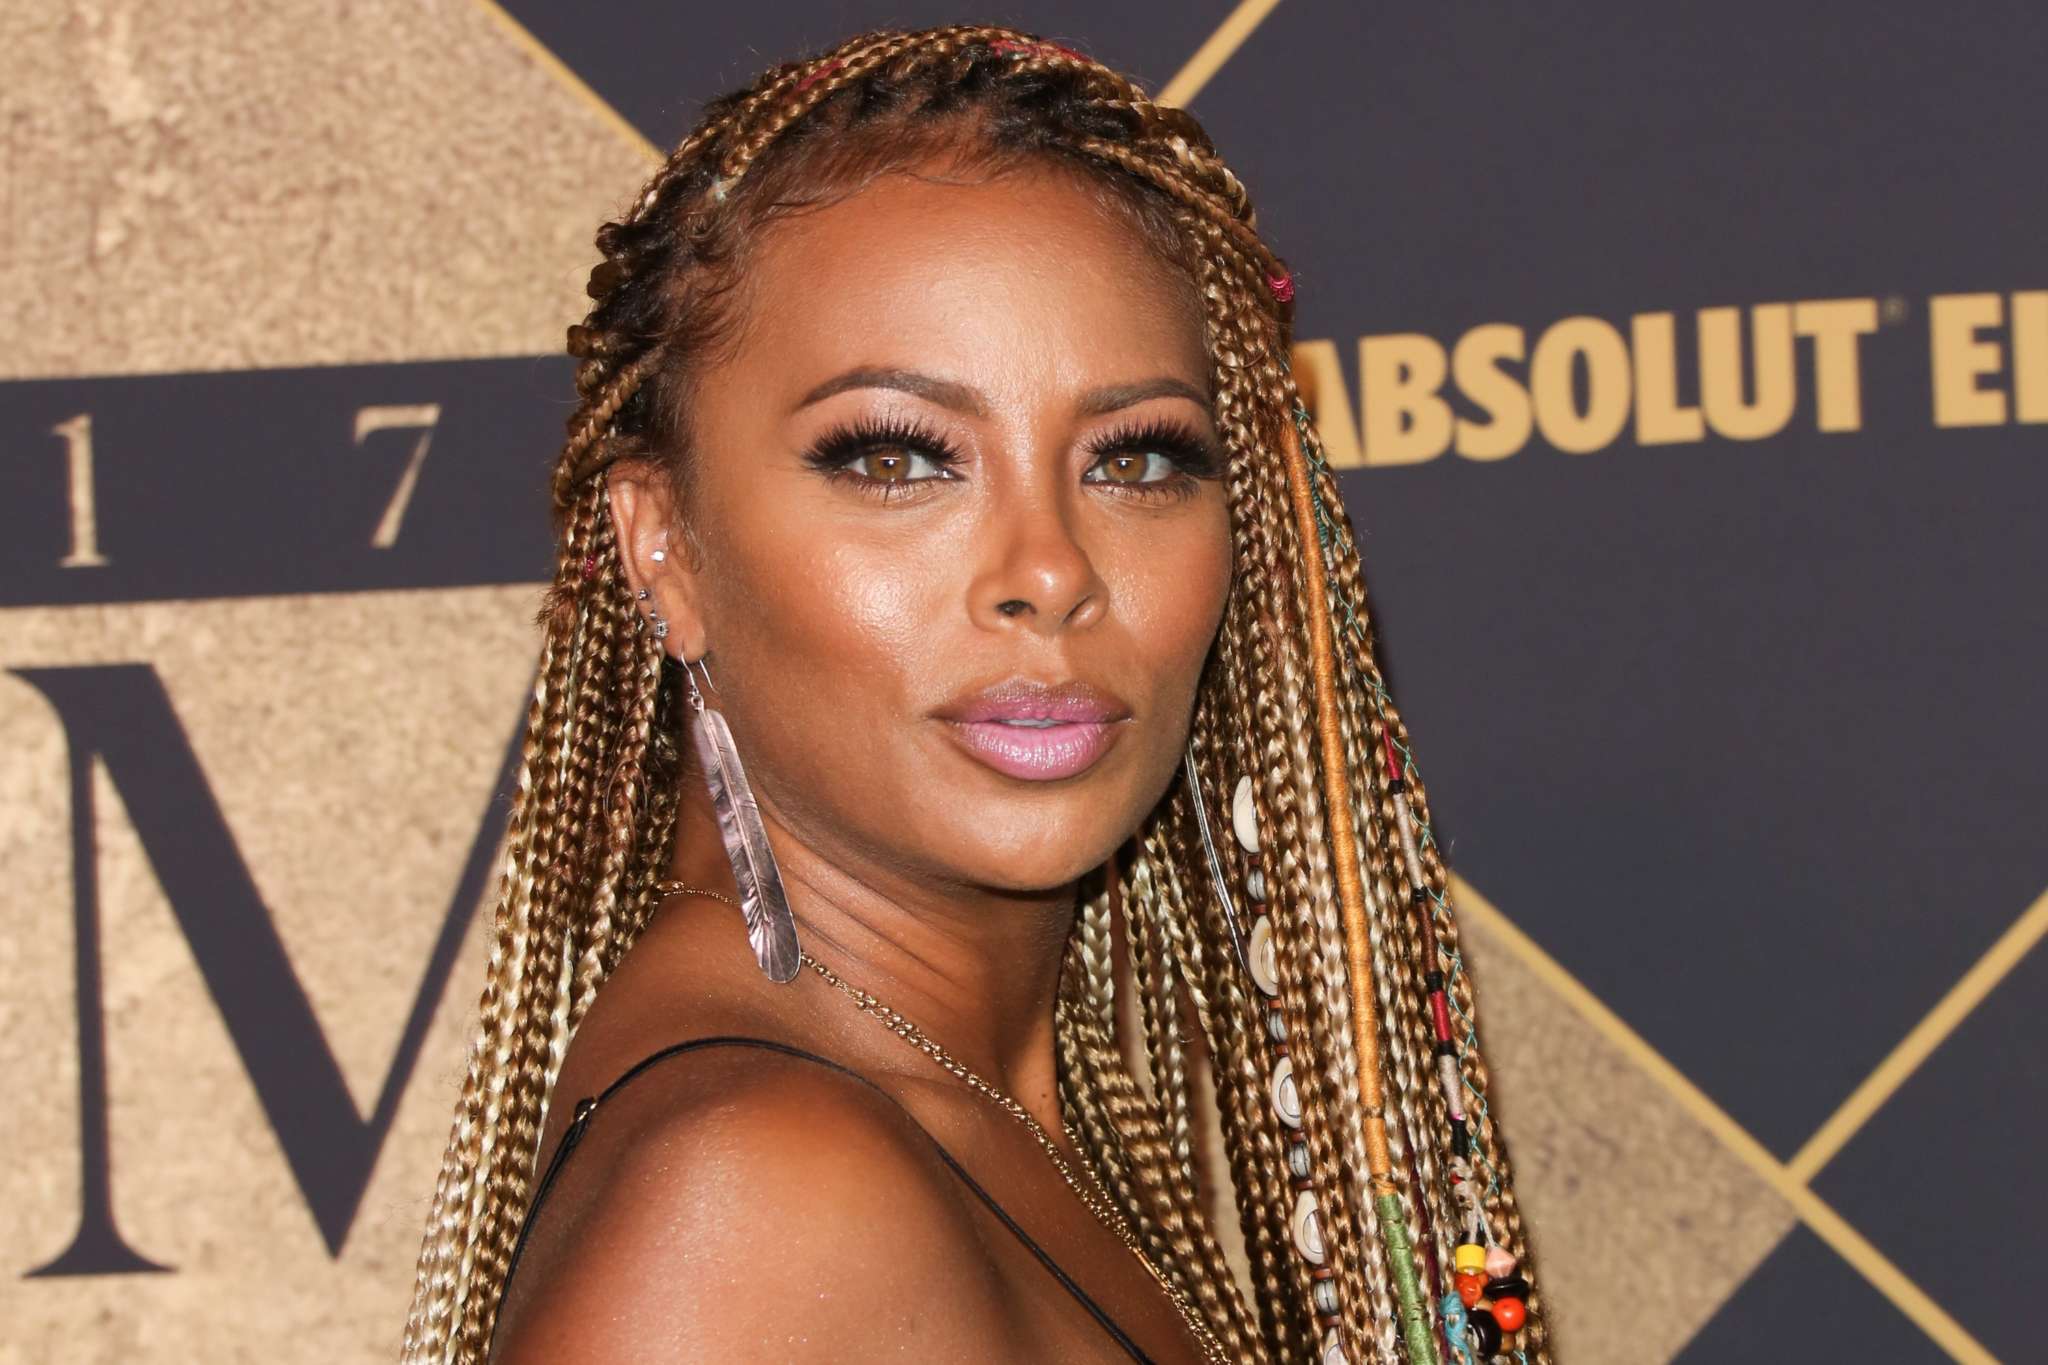 Eva Marcille Impresses Fans With A Video Of An Online Concert - See These Black Queens